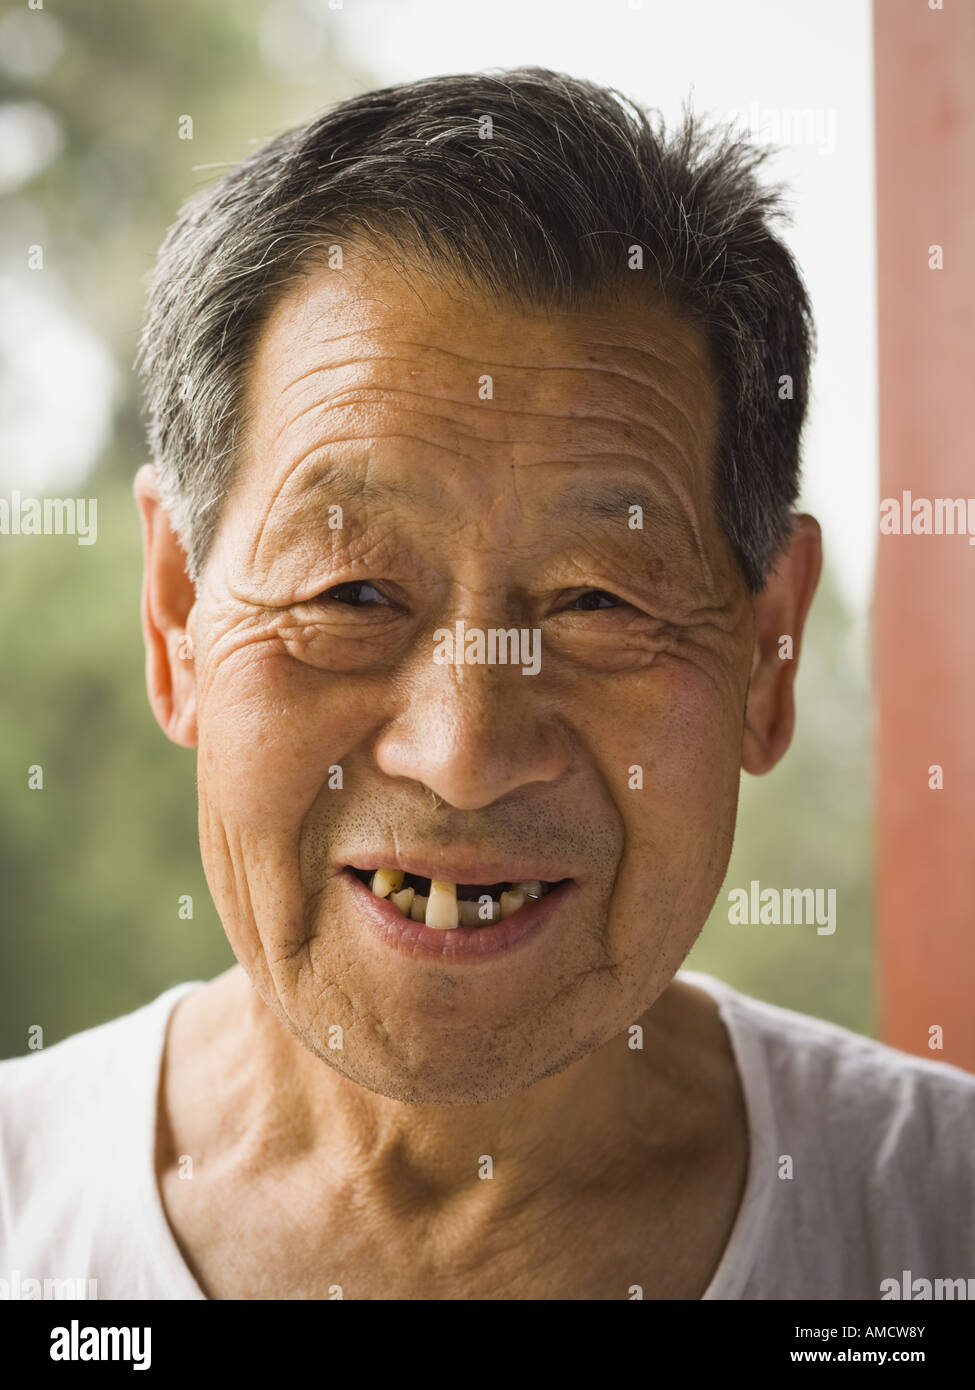 Portrait of a toothless man outdoors smiling Stock Photo